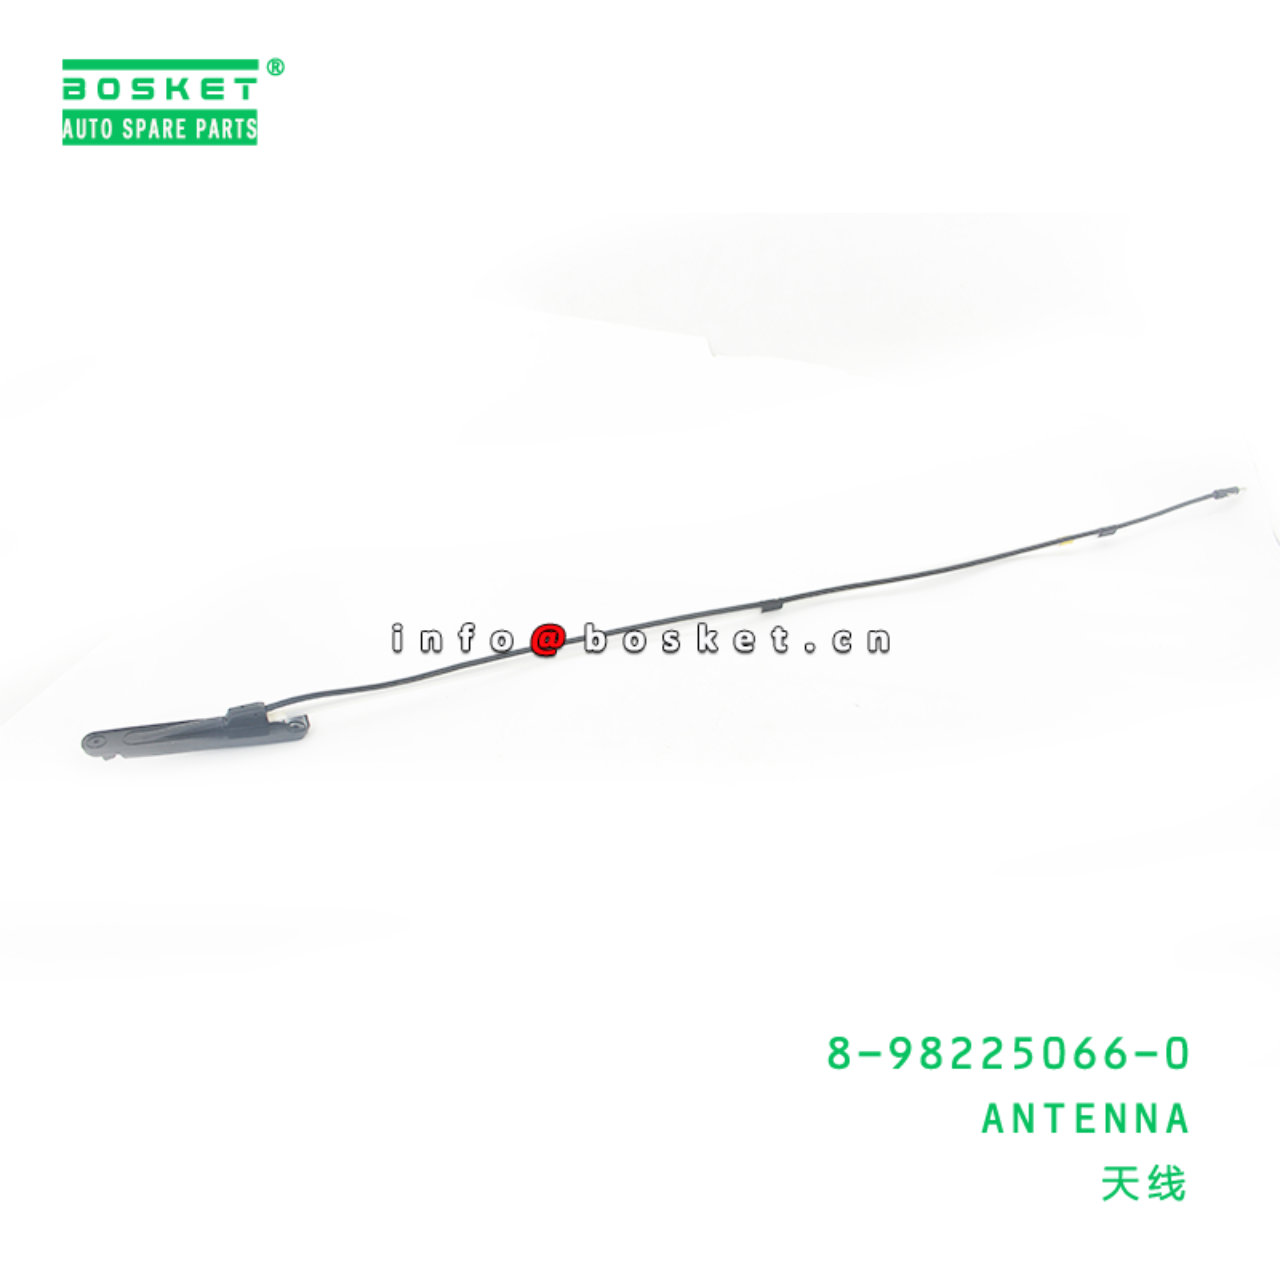 8-98225066-0 Antenna Suitable for ISUZU 700P 8982250660 - For 